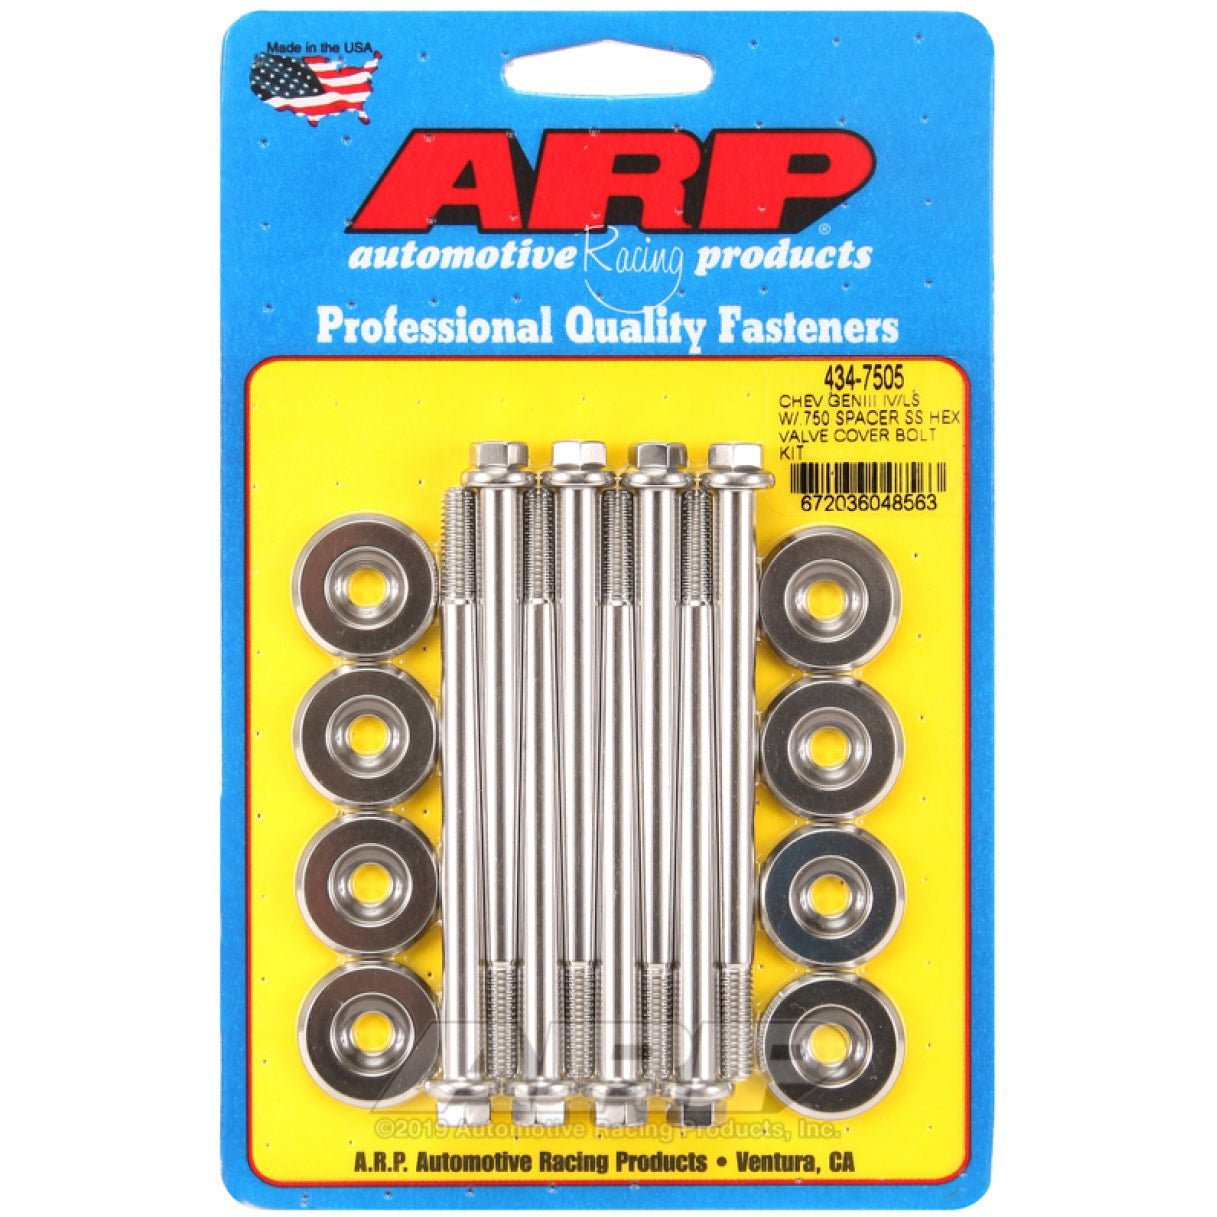 ARP Small Block Chevy GENIII/IV LS Series .750 Spacer Hex Valve Cover Bolt Kit - Stainless Steel ARP Hardware Kits - Other